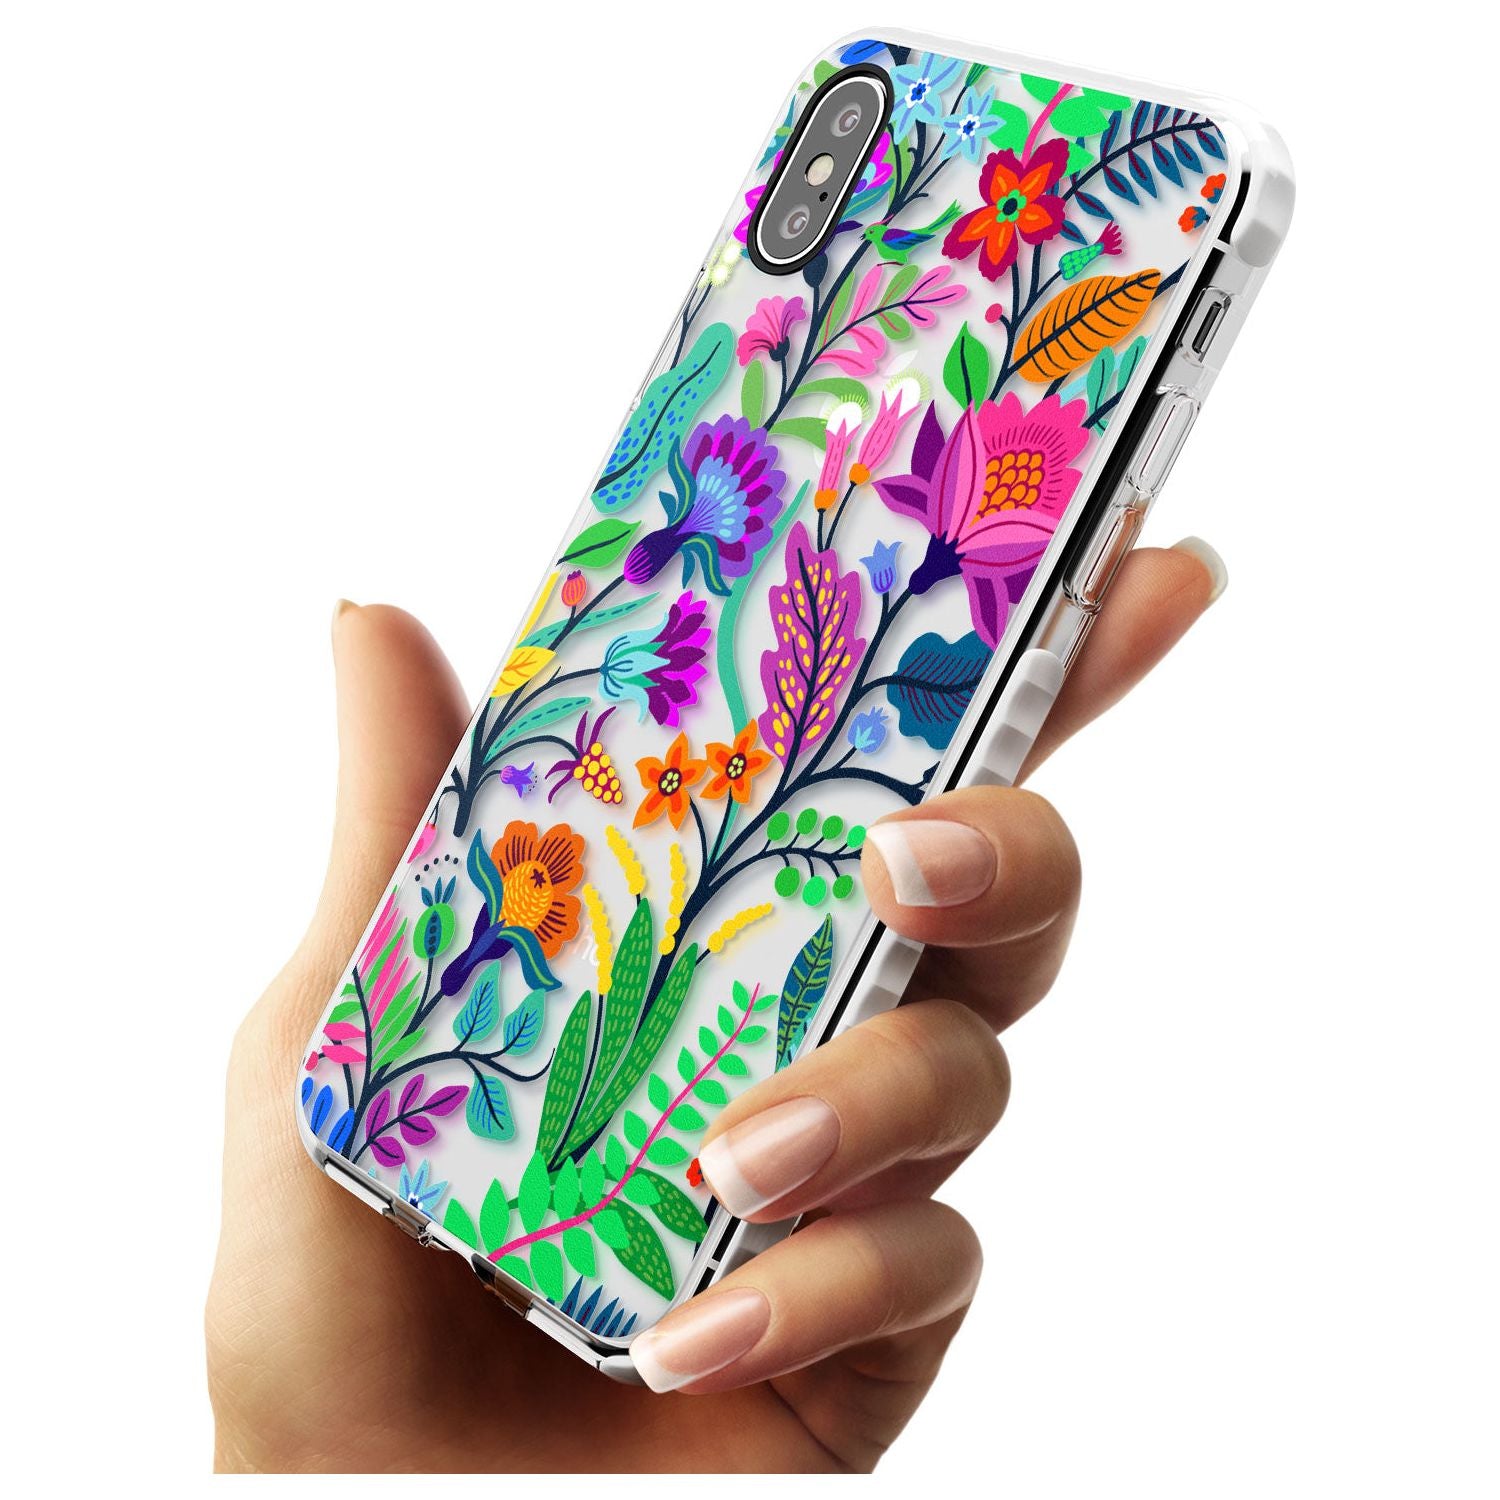 Floral Vibe Impact Phone Case for iPhone X XS Max XR